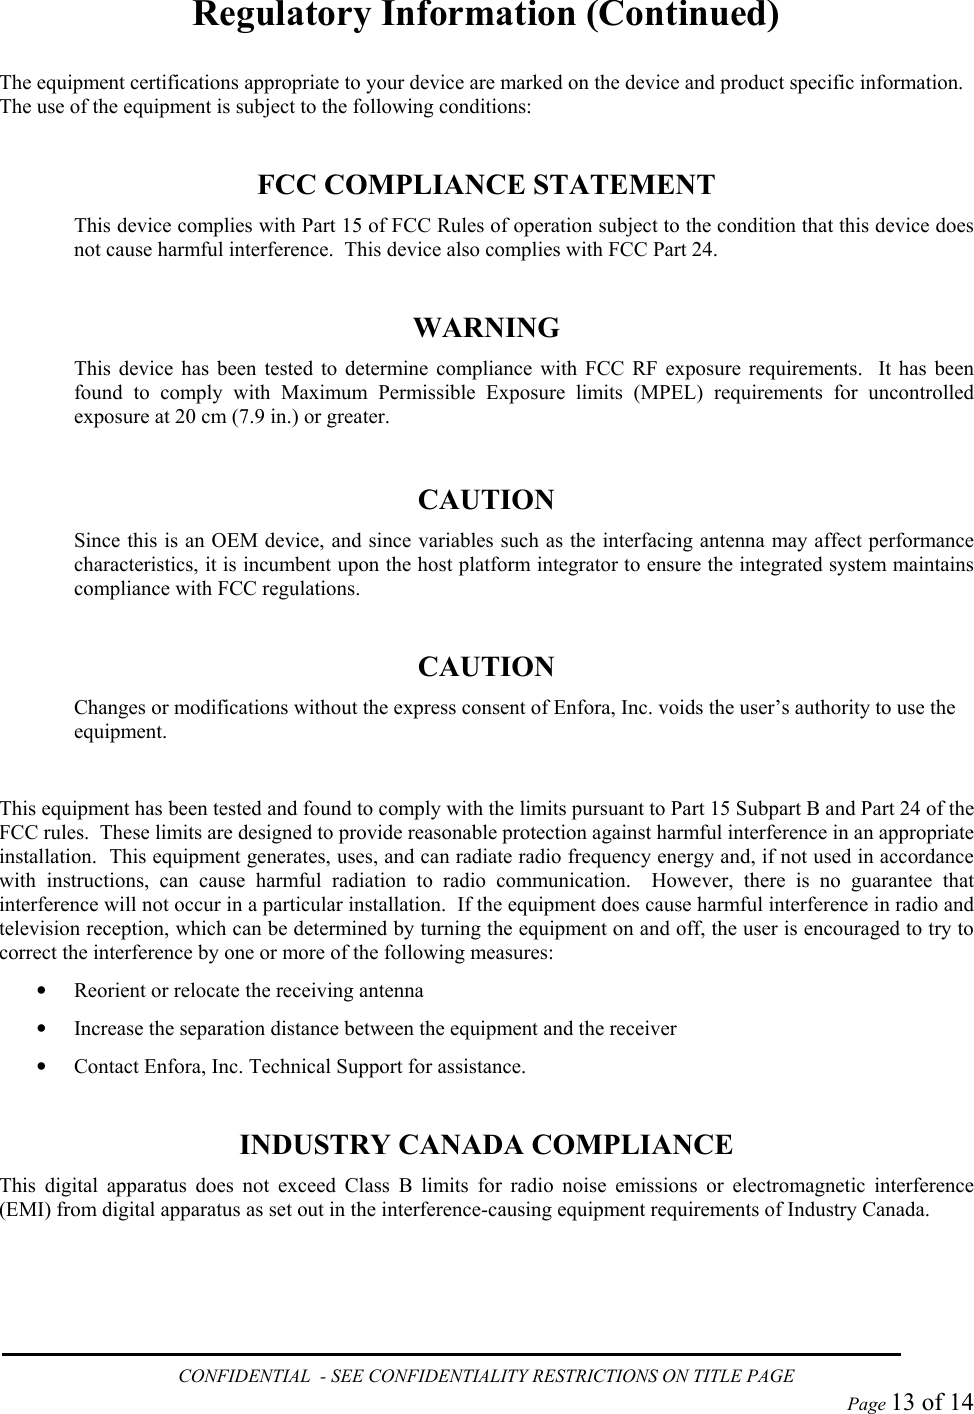 Regulatory Information (Continued)  The equipment certifications appropriate to your device are marked on the device and product specific information.  The use of the equipment is subject to the following conditions:  FCC COMPLIANCE STATEMENT This device complies with Part 15 of FCC Rules of operation subject to the condition that this device does not cause harmful interference.  This device also complies with FCC Part 24.  WARNING This device has been tested to determine compliance with FCC RF exposure requirements.  It has been found to comply with Maximum Permissible Exposure limits (MPEL) requirements for uncontrolled exposure at 20 cm (7.9 in.) or greater.  CAUTION Since this is an OEM device, and since variables such as the interfacing antenna may affect performance characteristics, it is incumbent upon the host platform integrator to ensure the integrated system maintains compliance with FCC regulations.  CAUTION Changes or modifications without the express consent of Enfora, Inc. voids the user’s authority to use the equipment.  This equipment has been tested and found to comply with the limits pursuant to Part 15 Subpart B and Part 24 of the FCC rules.  These limits are designed to provide reasonable protection against harmful interference in an appropriate installation.  This equipment generates, uses, and can radiate radio frequency energy and, if not used in accordance with instructions, can cause harmful radiation to radio communication.  However, there is no guarantee that interference will not occur in a particular installation.  If the equipment does cause harmful interference in radio and television reception, which can be determined by turning the equipment on and off, the user is encouraged to try to correct the interference by one or more of the following measures: •  Reorient or relocate the receiving antenna •  Increase the separation distance between the equipment and the receiver •  Contact Enfora, Inc. Technical Support for assistance.  INDUSTRY CANADA COMPLIANCE This digital apparatus does not exceed Class B limits for radio noise emissions or electromagnetic interference (EMI) from digital apparatus as set out in the interference-causing equipment requirements of Industry Canada. CONFIDENTIAL  - SEE CONFIDENTIALITY RESTRICTIONS ON TITLE PAGE  Page 13 of 14 